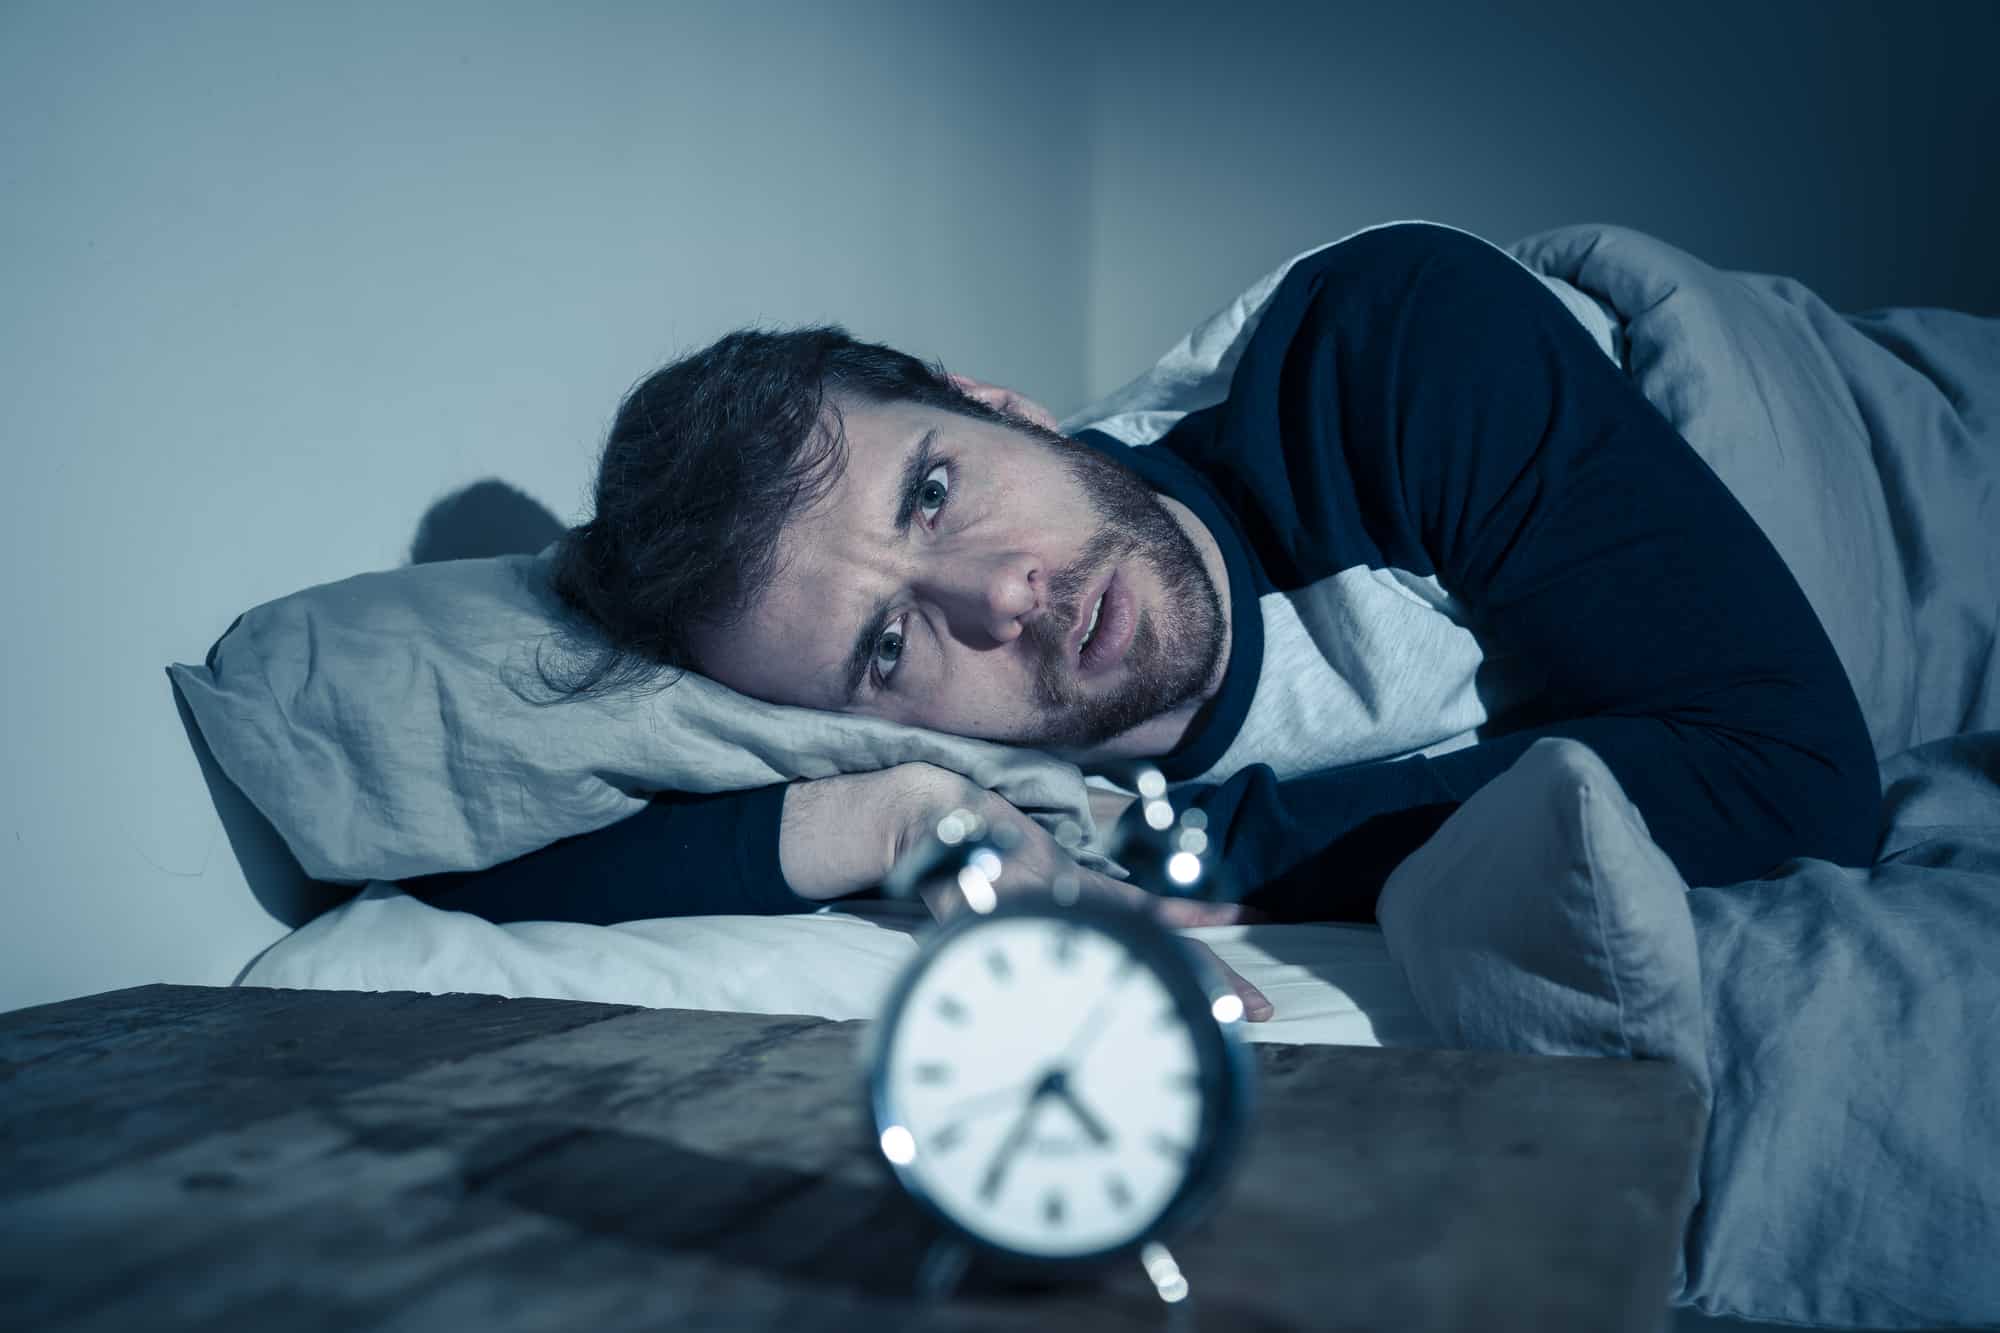 How Can I Sleep To Avoid Waking Up With Pain?